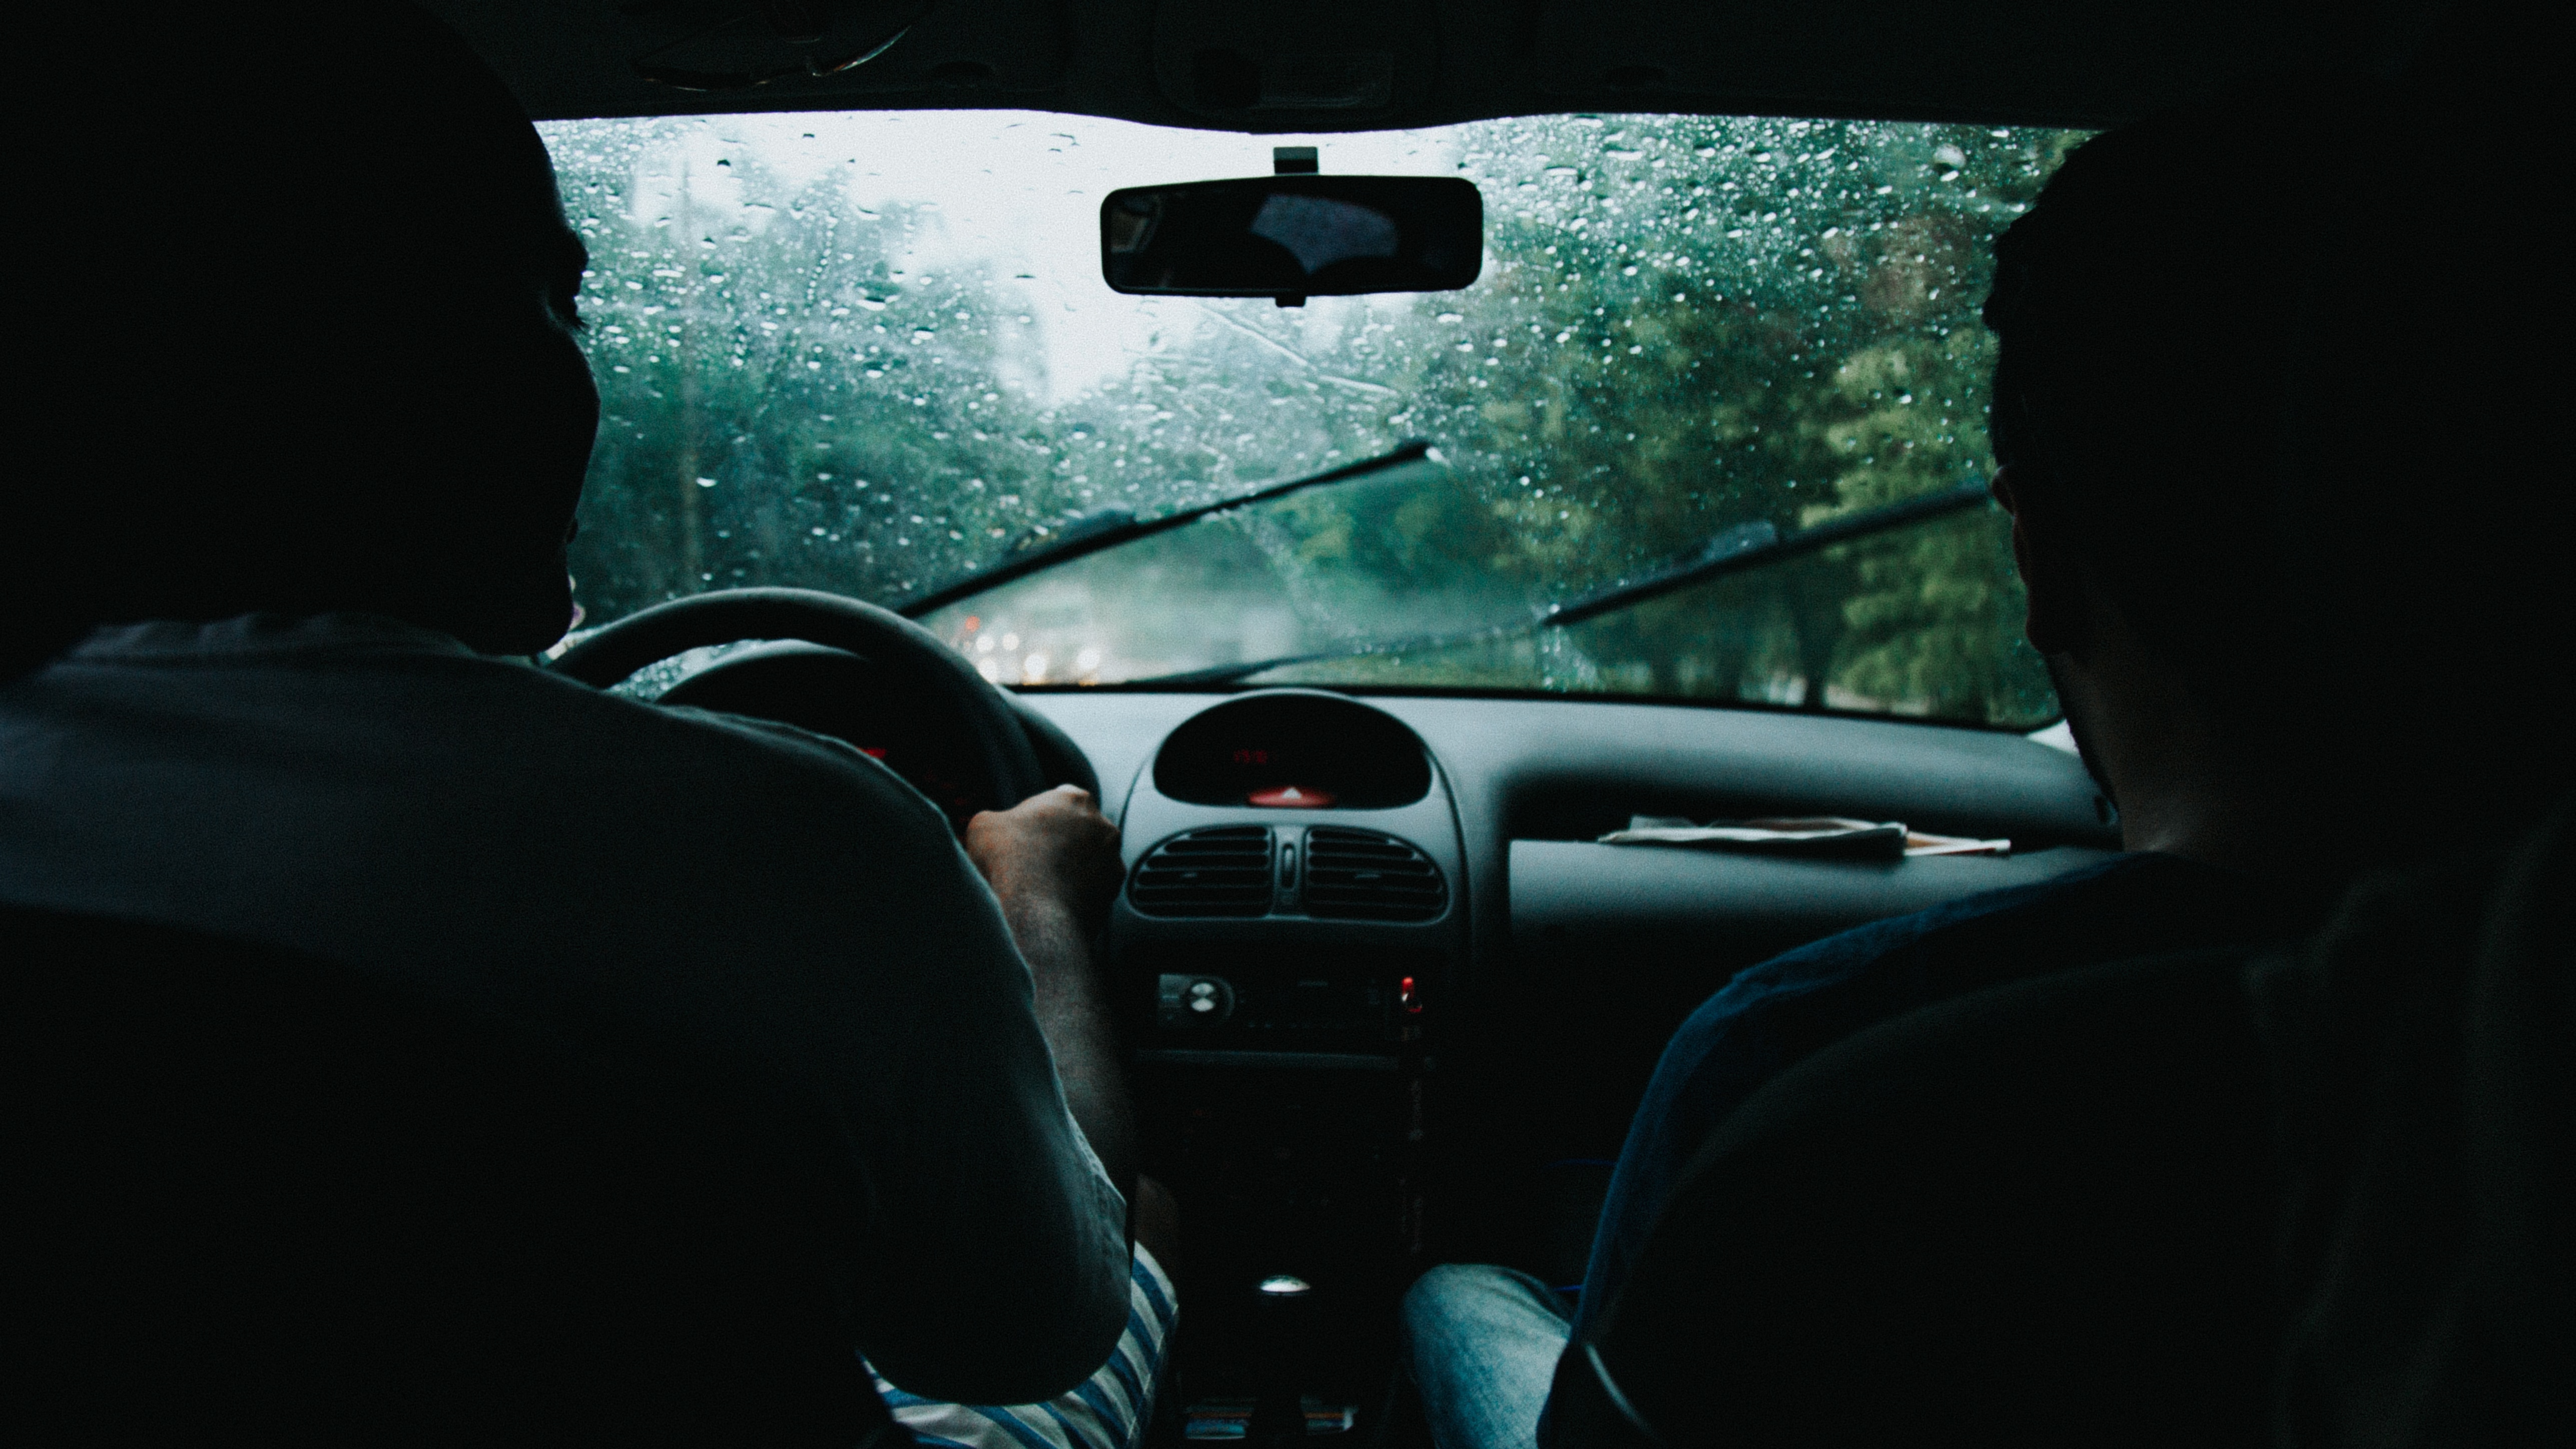 Using all of these tips in addition to all of your normal safe driving habits can highly reduce the risk of losing control of your vehicle in unfamiliar weather conditions.